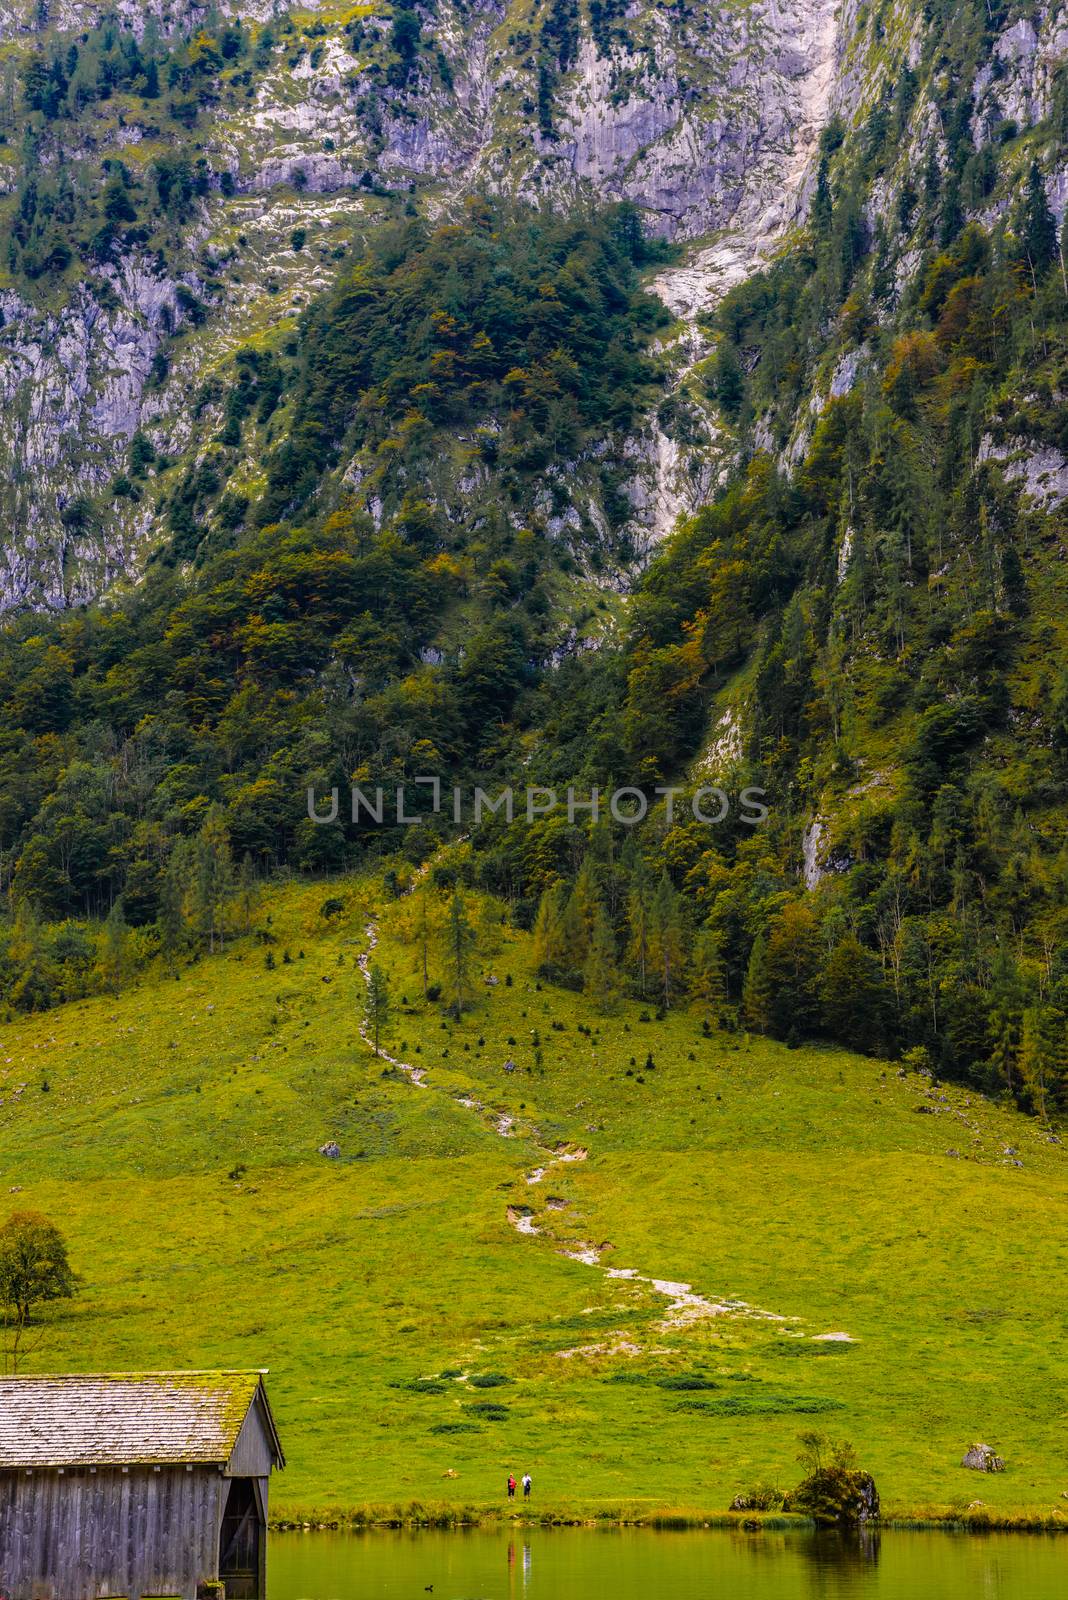 Grass meadow in Koenigssee, Konigsee, Berchtesgaden National Park, Bavaria, Germany by Eagle2308